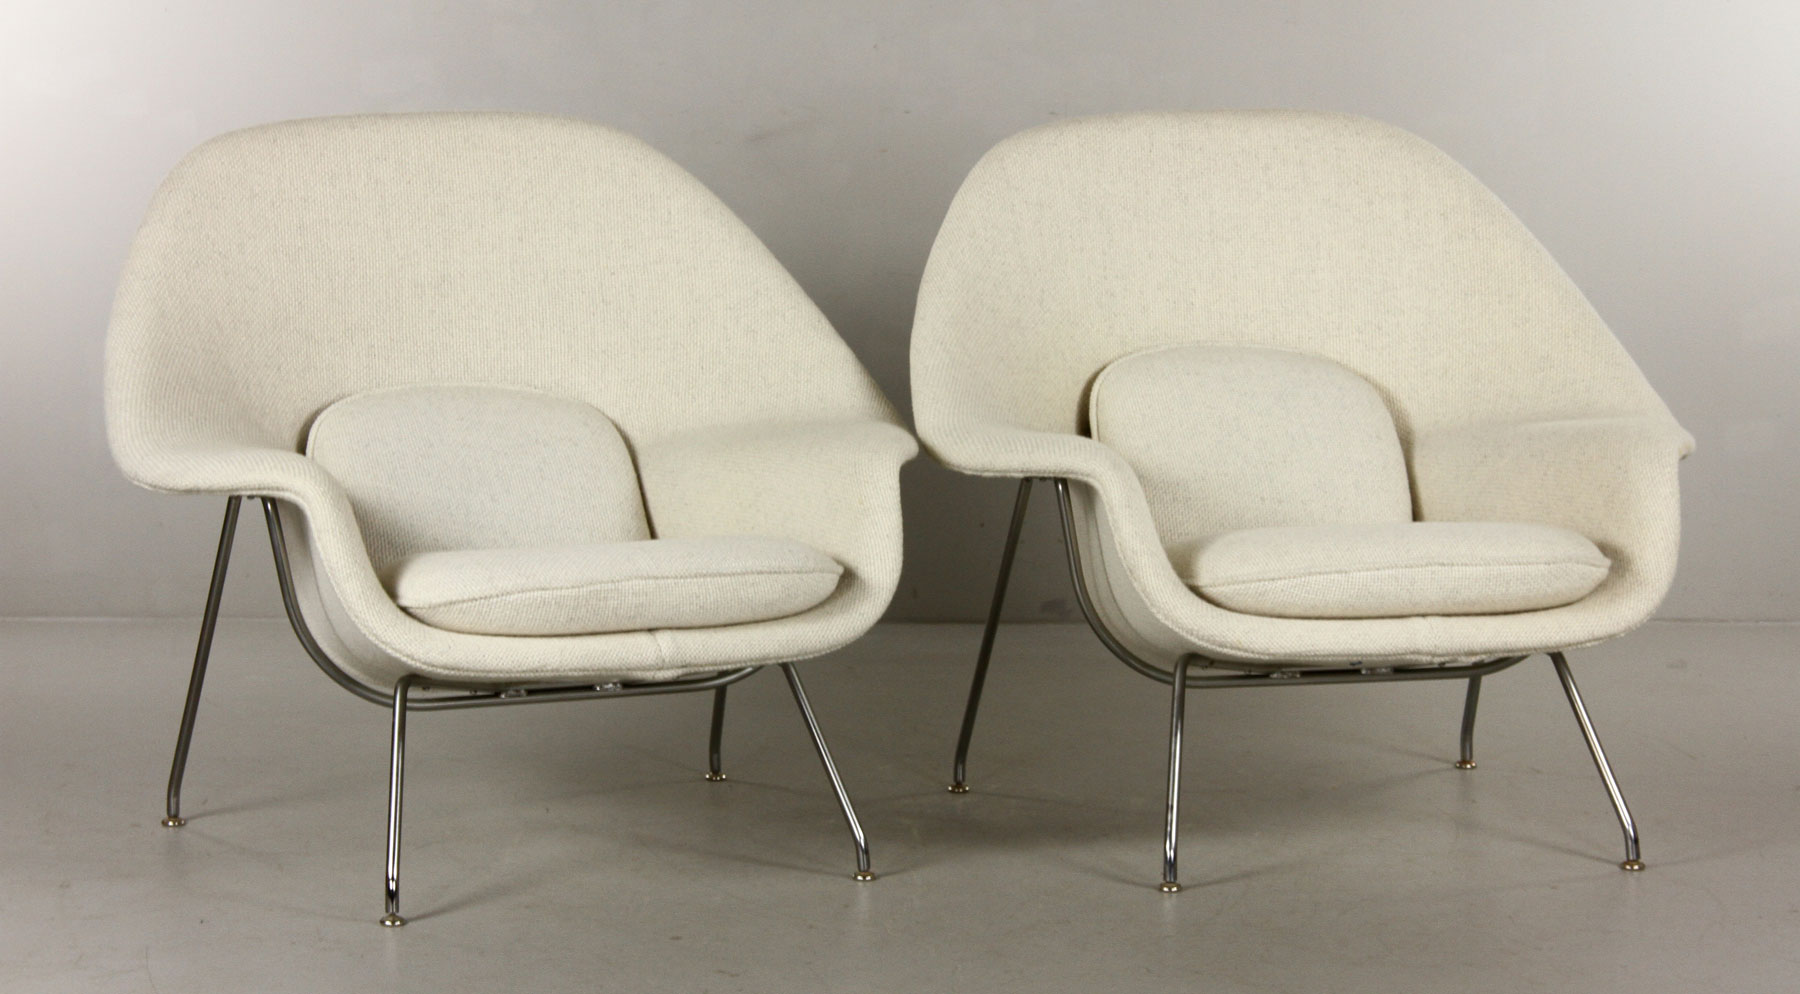 Pair of Knoll "Womb" chairs with Morocco wool upholstery